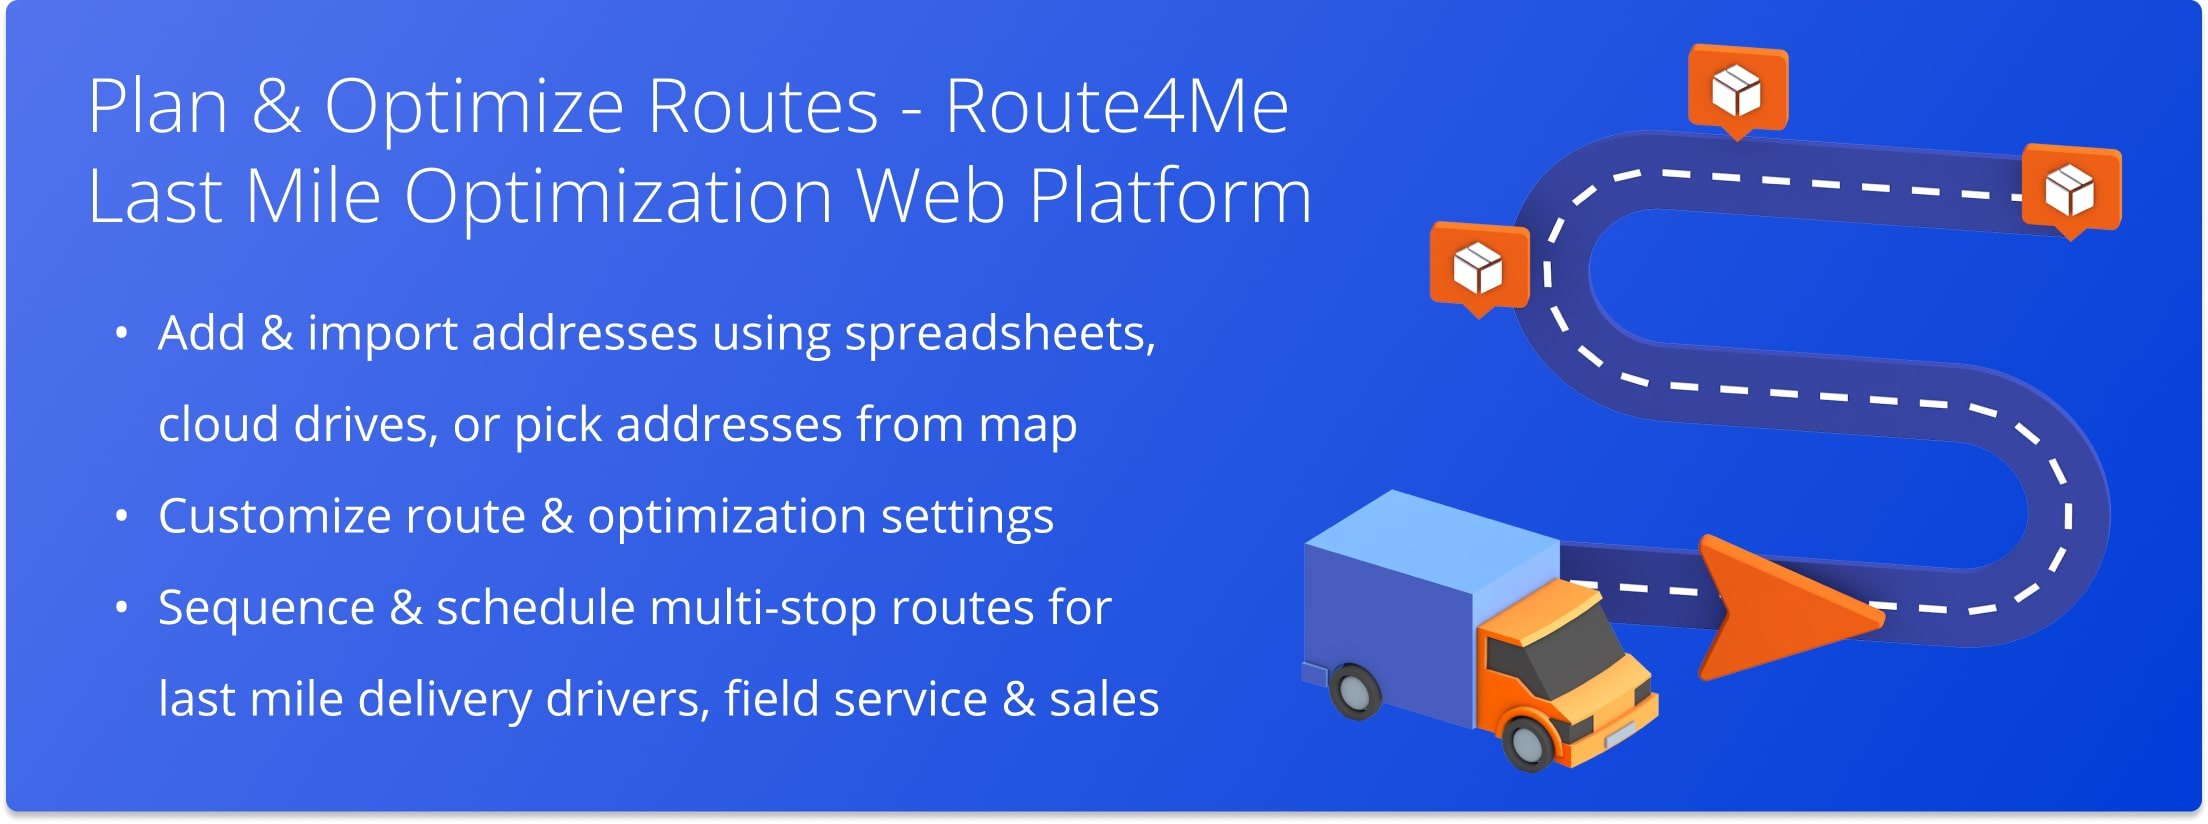 Plan, sequence, schedule, and dispatch delivery driver, field service, and sales routes using Route4Me's Last Mile Optimization Web Platform.